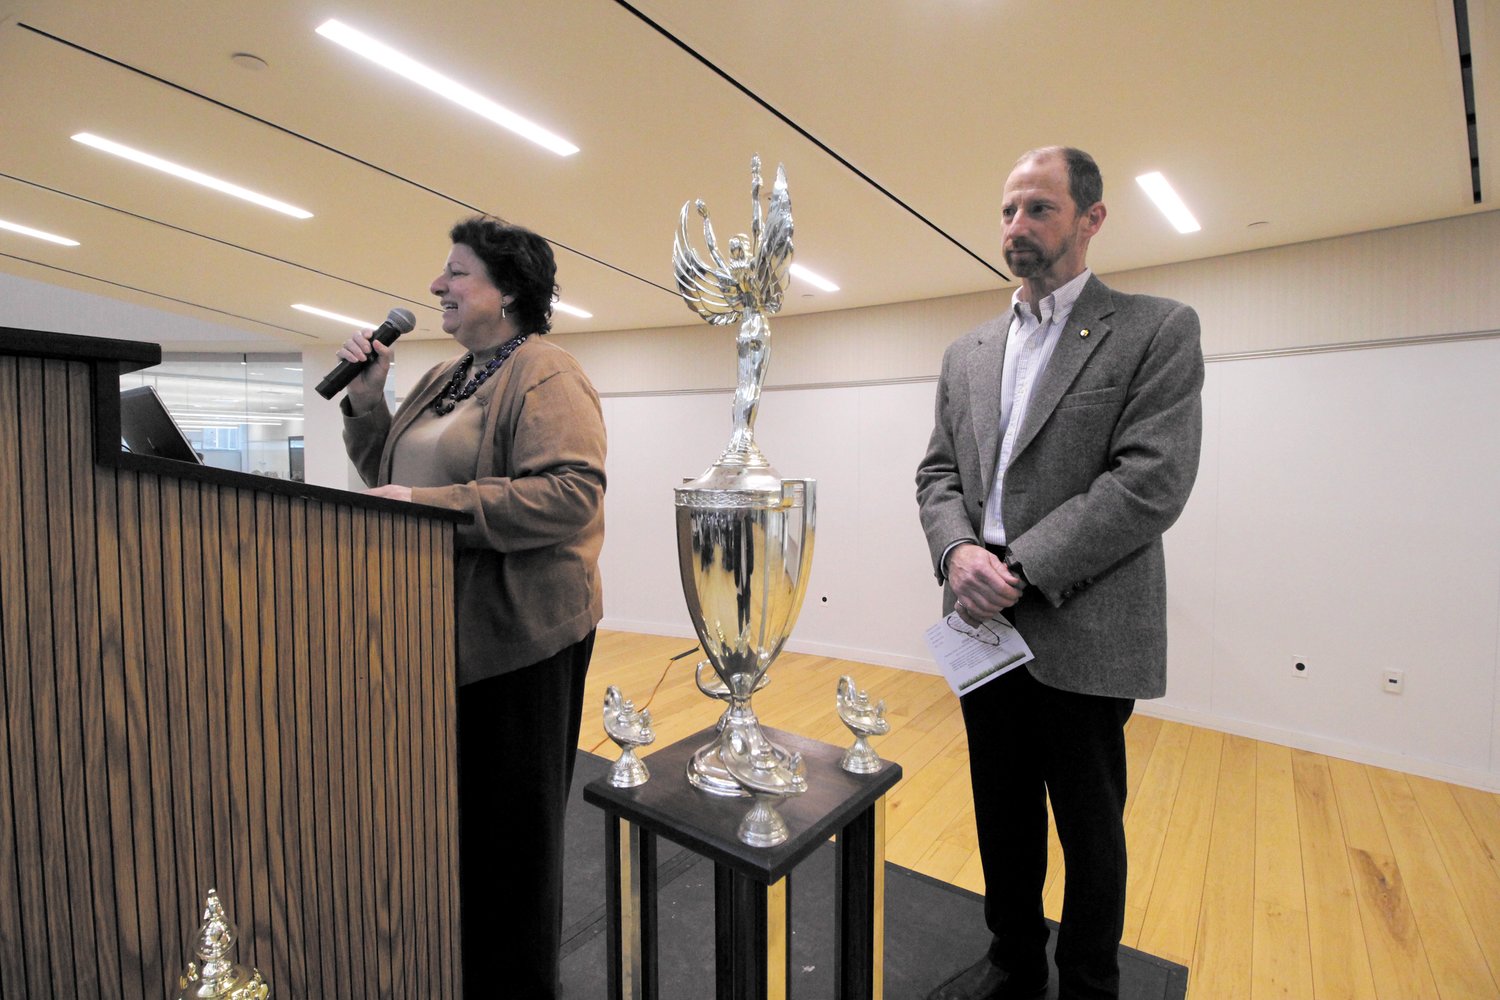 Inge Ameer, vice president of Student Affairs at Bryant welcomes Rhode Island Academic Decathlon teams to the competition. Standing with her is Frank Lenox, RIAD executive director. (Cranston Herald Photos)